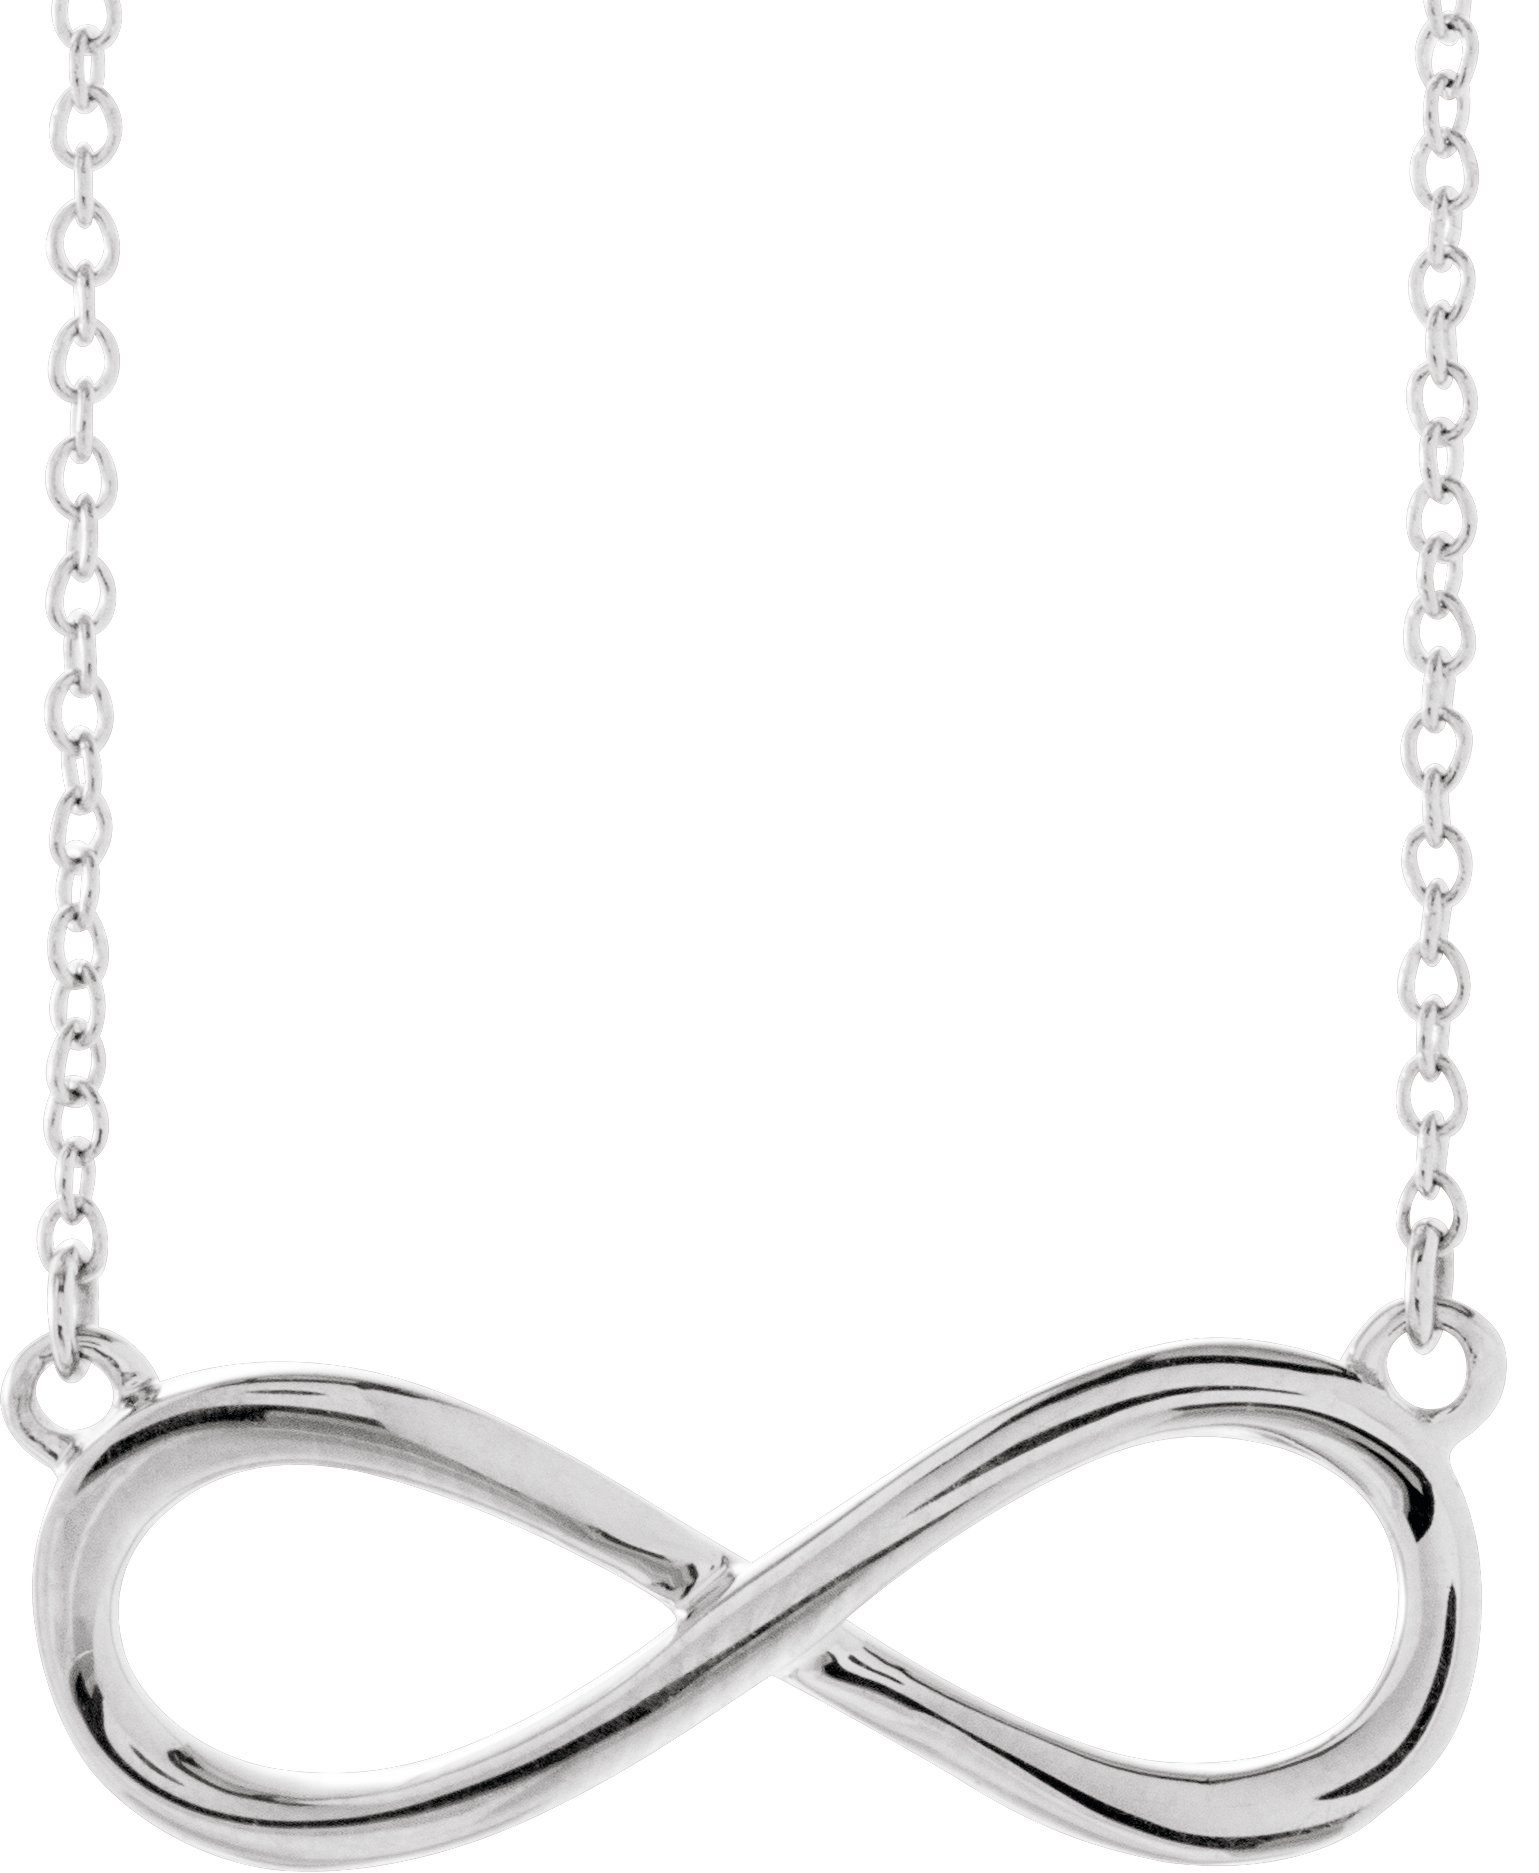 Sterling Silver Infinity Inspired 18 inch Necklace Ref. 13221815